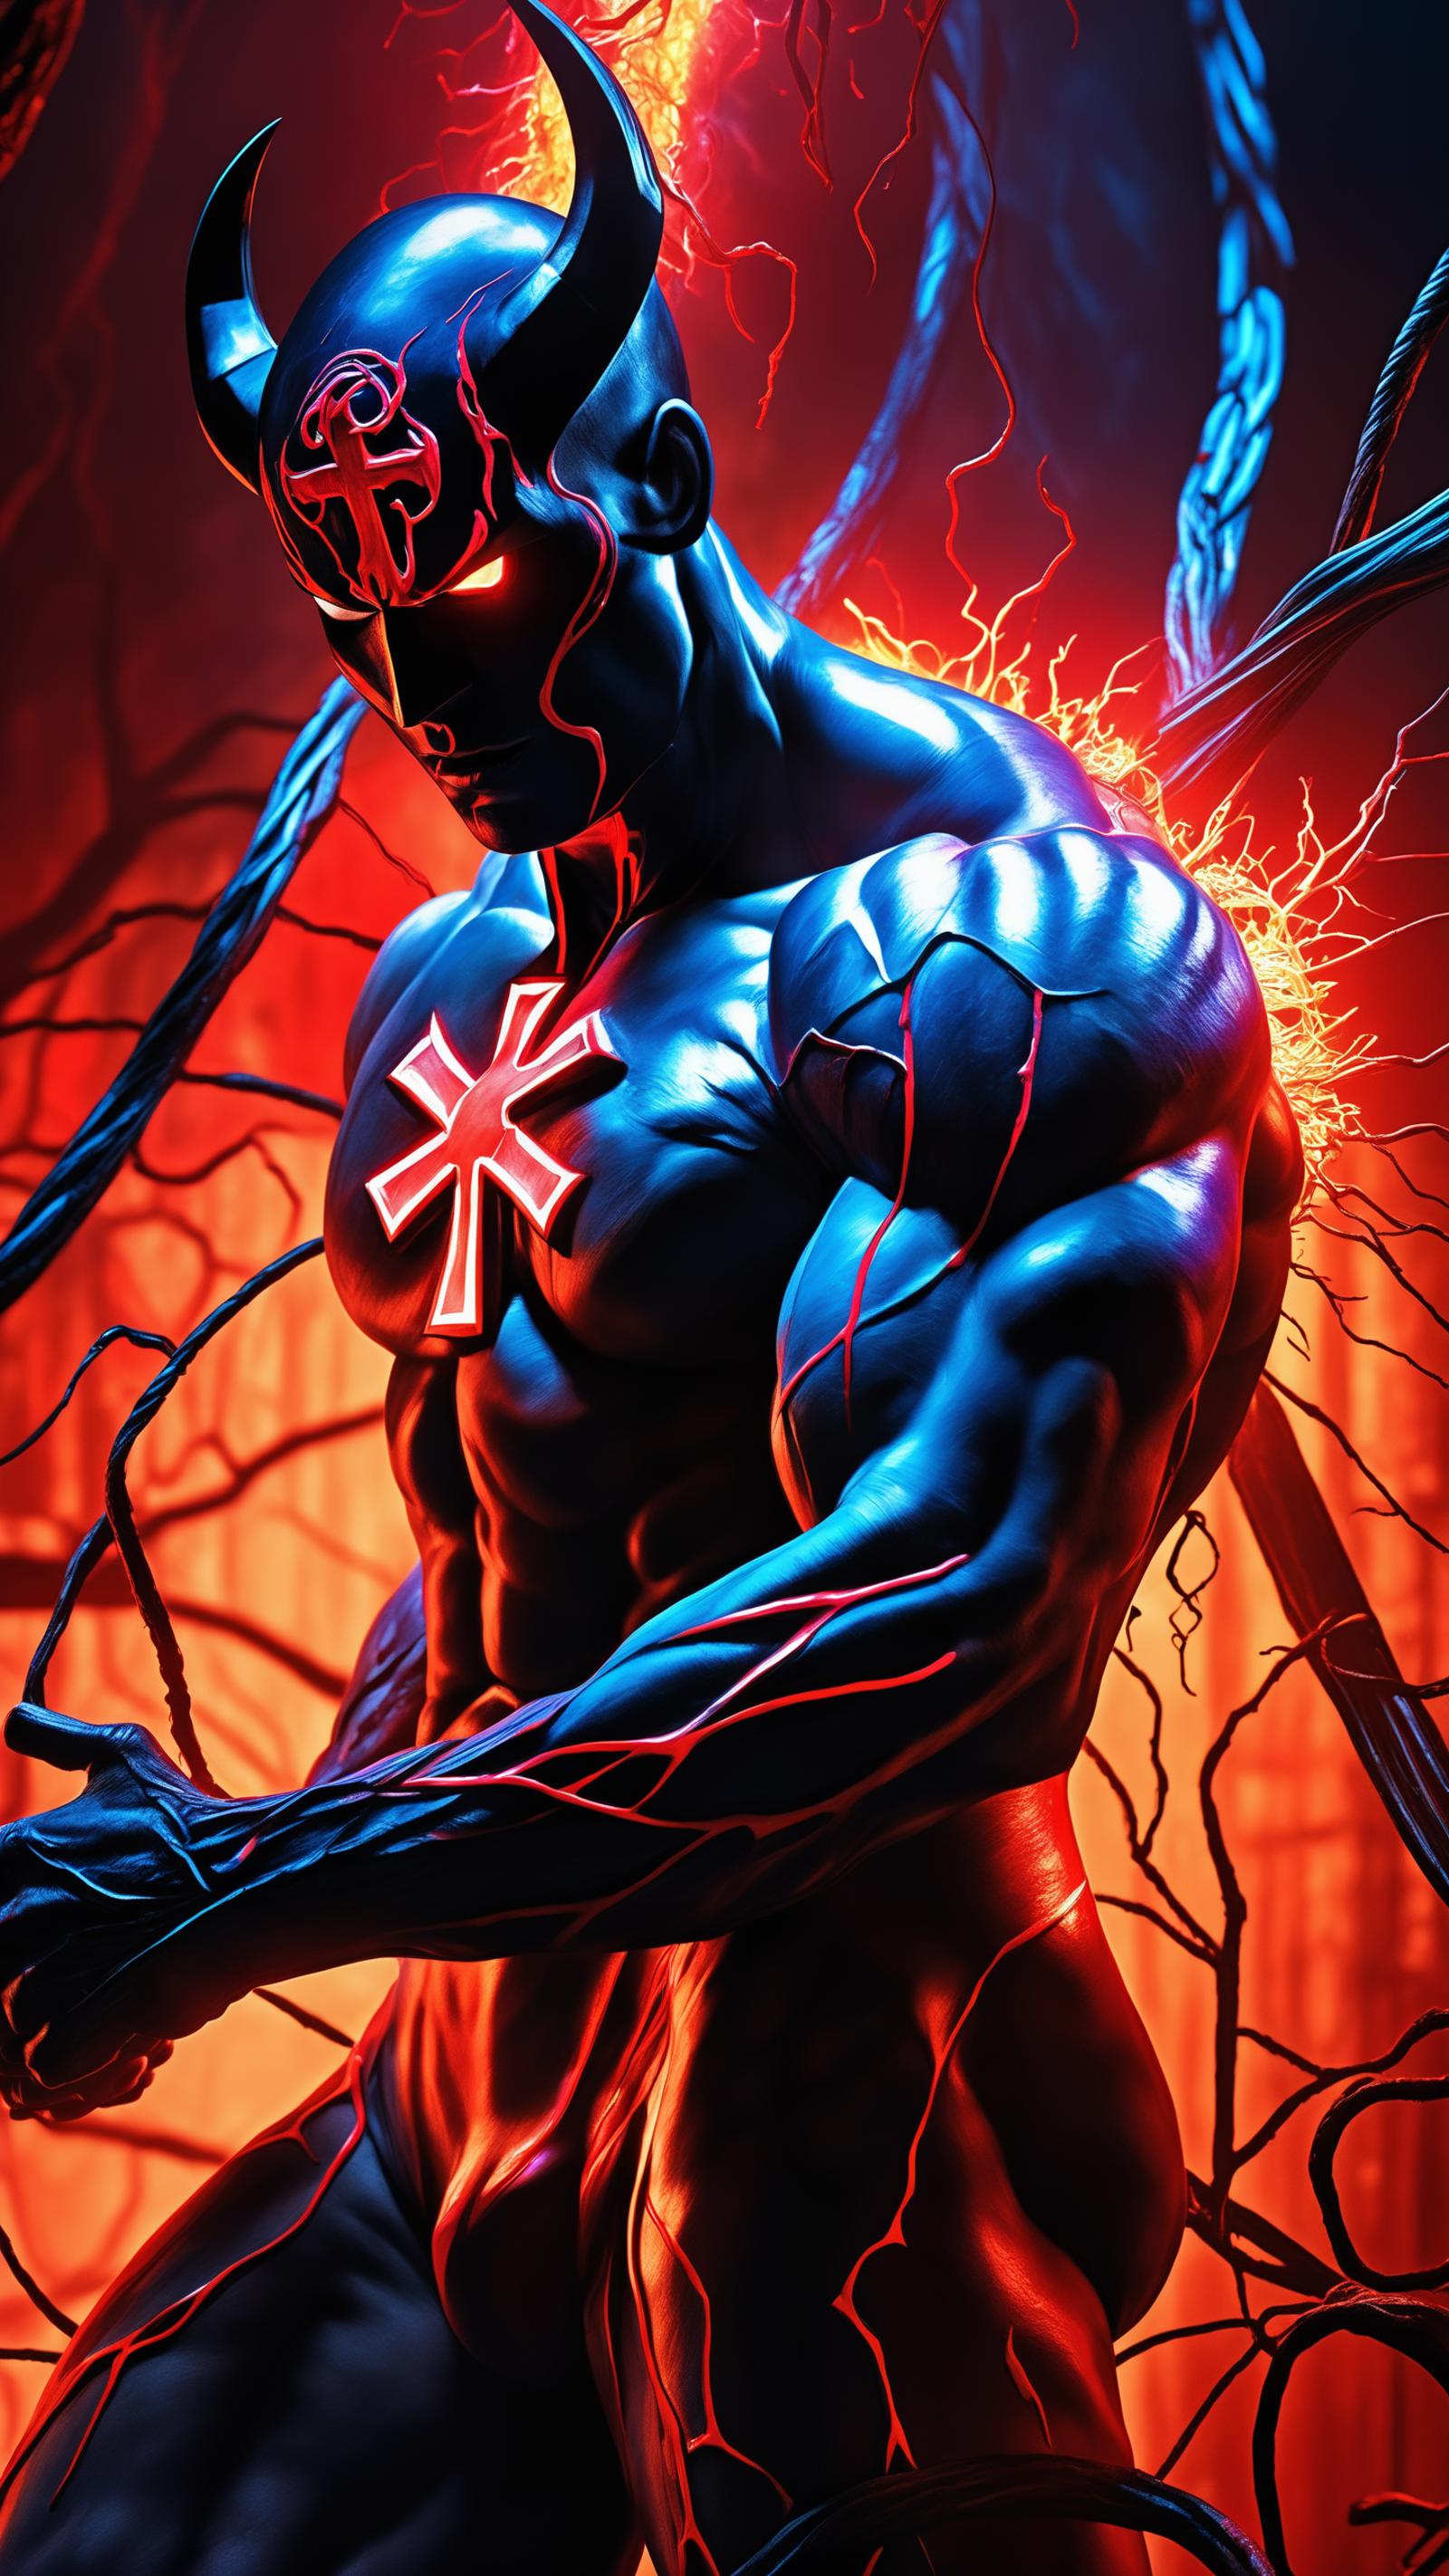 A muscular blue and black superhero with a red star on his chest.